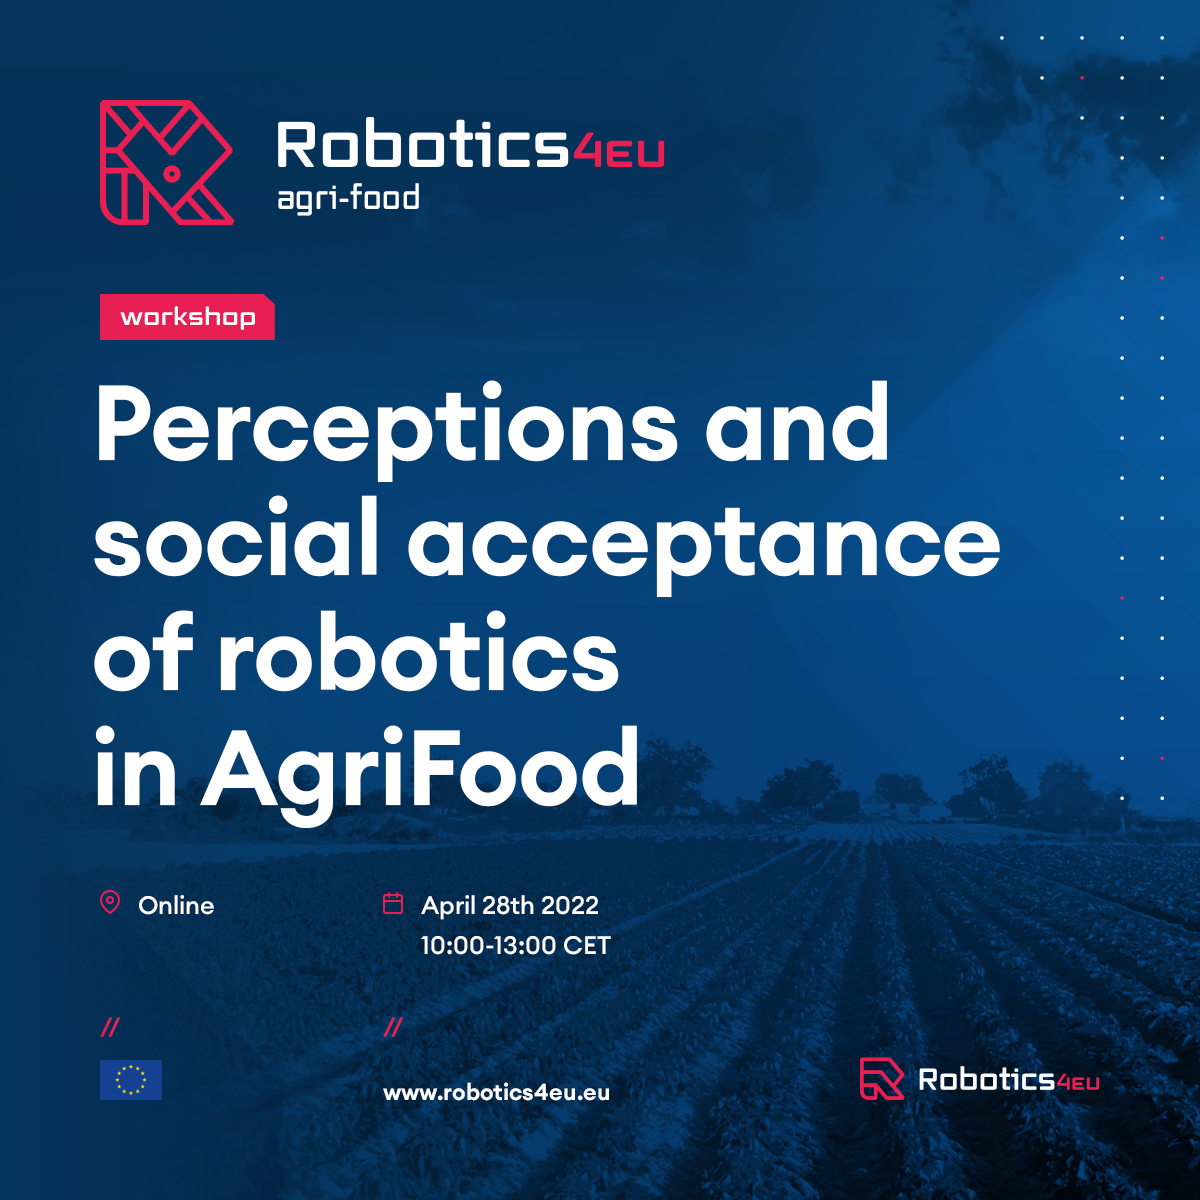 Perceptions and social acceptance of robotics in agrifood